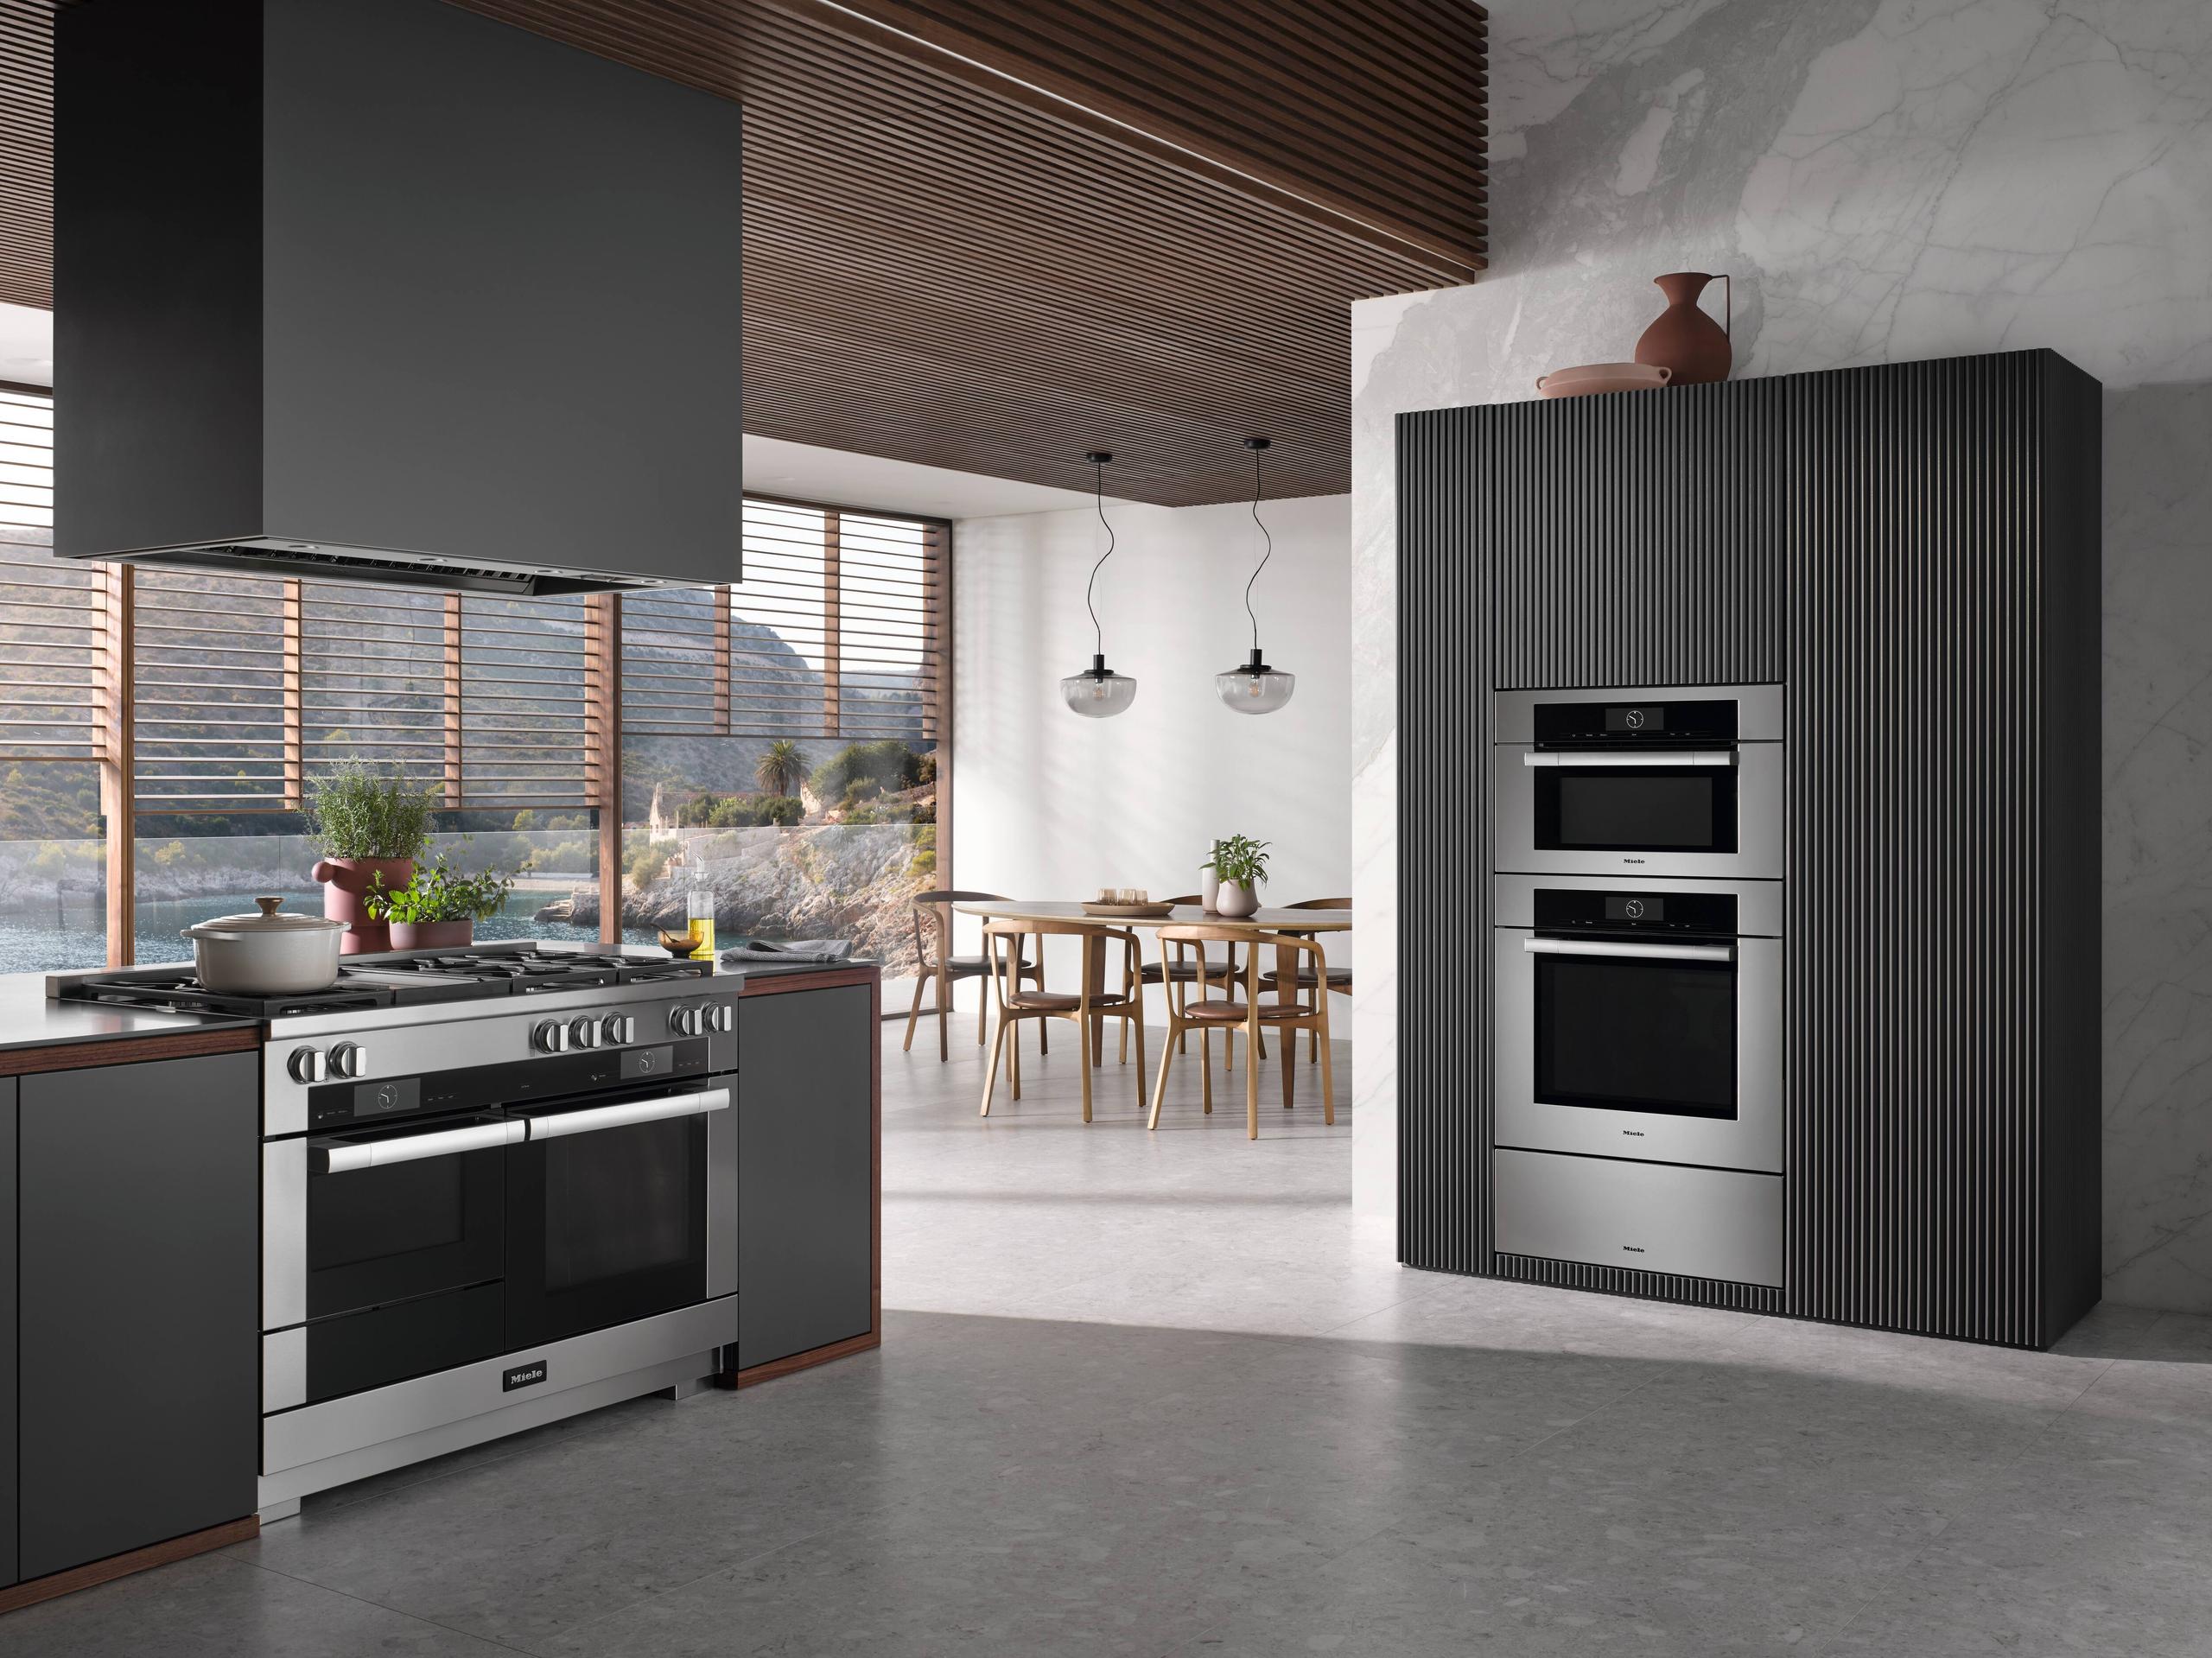 Miele HR19563GDFGDCLEANTOUCHSTEEL Hr 1956-3 G Df Gd - 48 Inch Range - The Dual Fuel All-Rounder With M Touch For The Highest Demands.